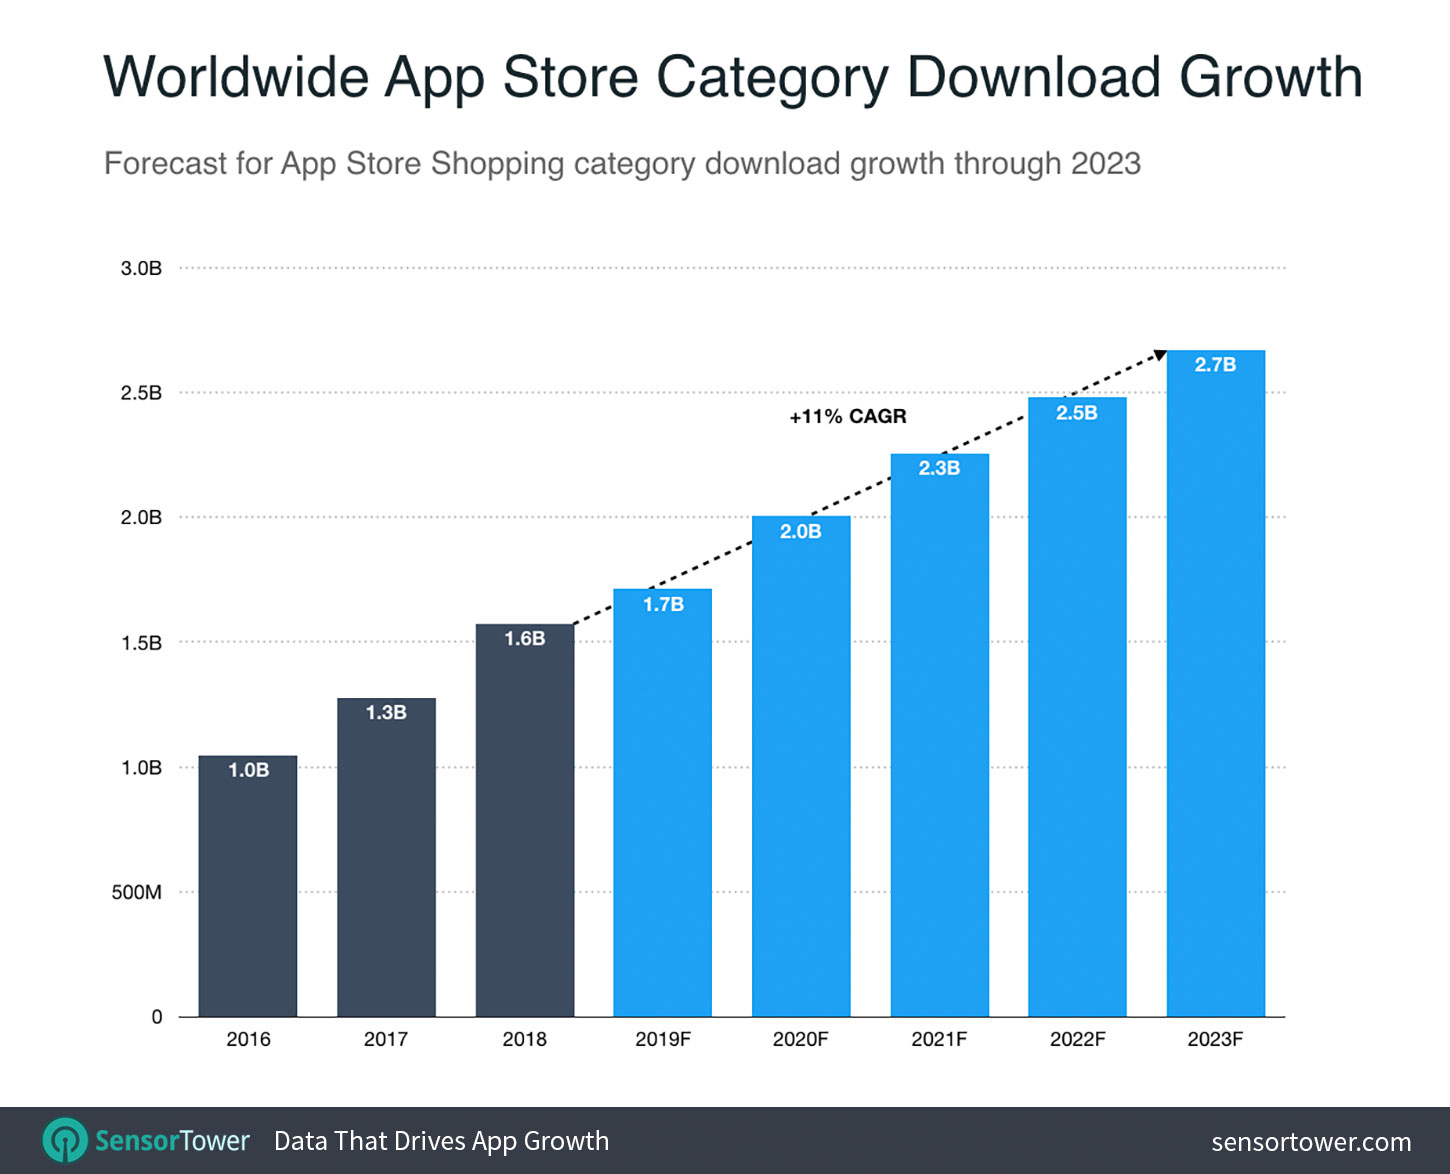 Worldwide Shopping Apps Download Growth Forecast Chart for the App Store